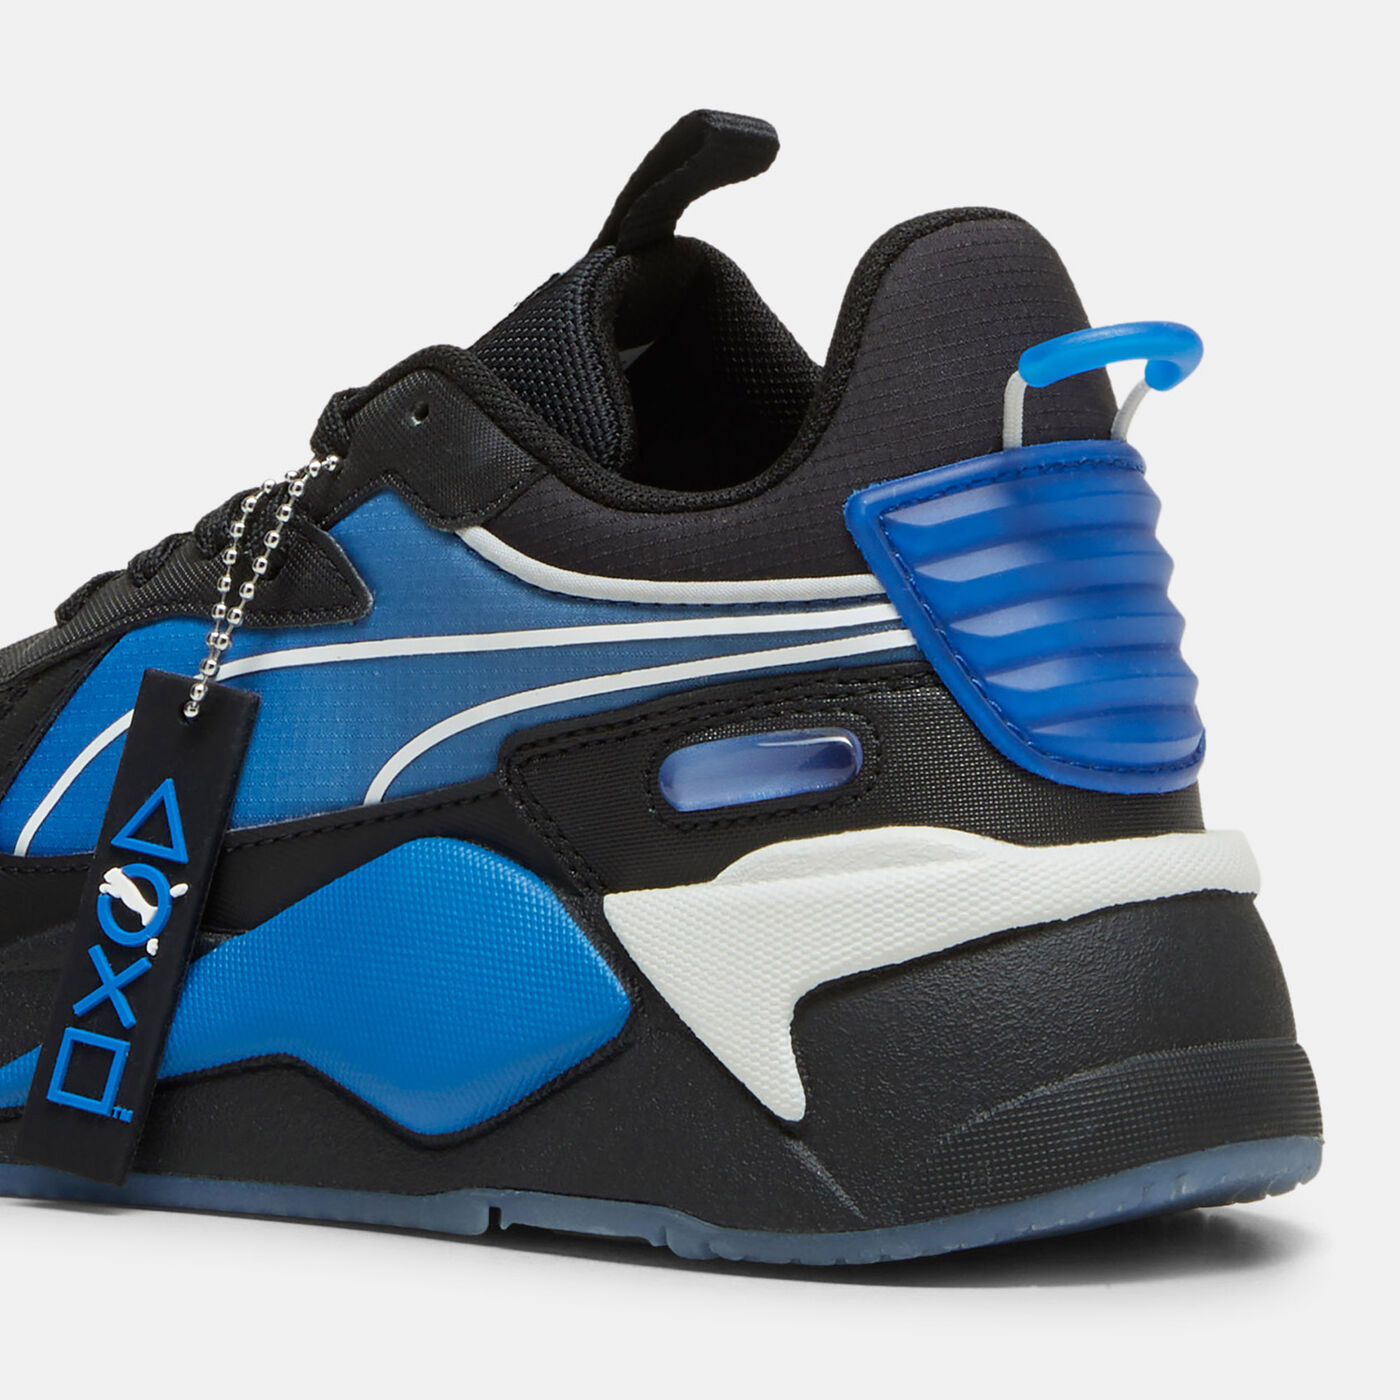 Kids' x PLAYSTATION RS-X Shoes